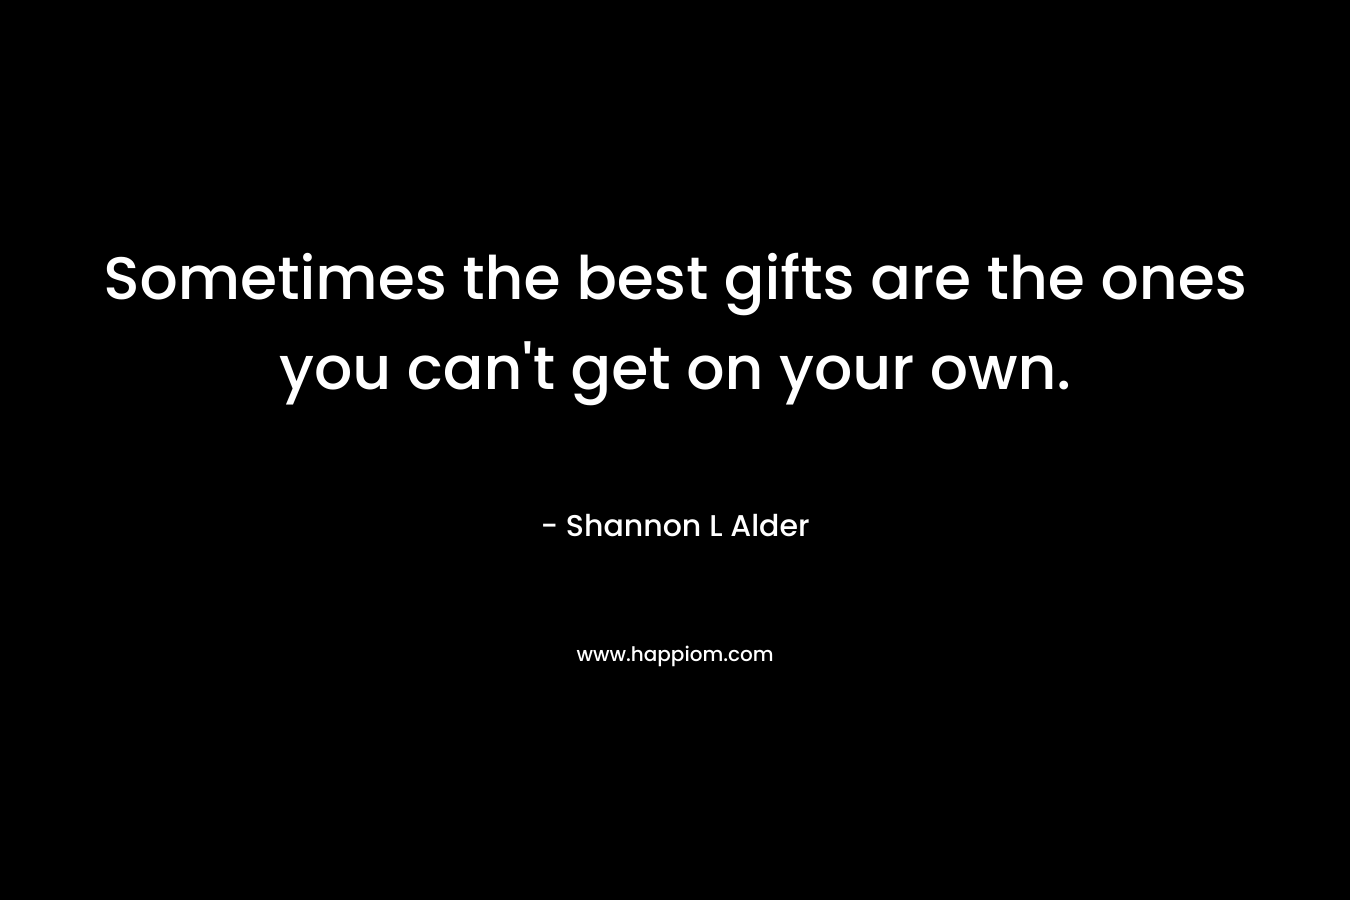 Sometimes the best gifts are the ones you can't get on your own.